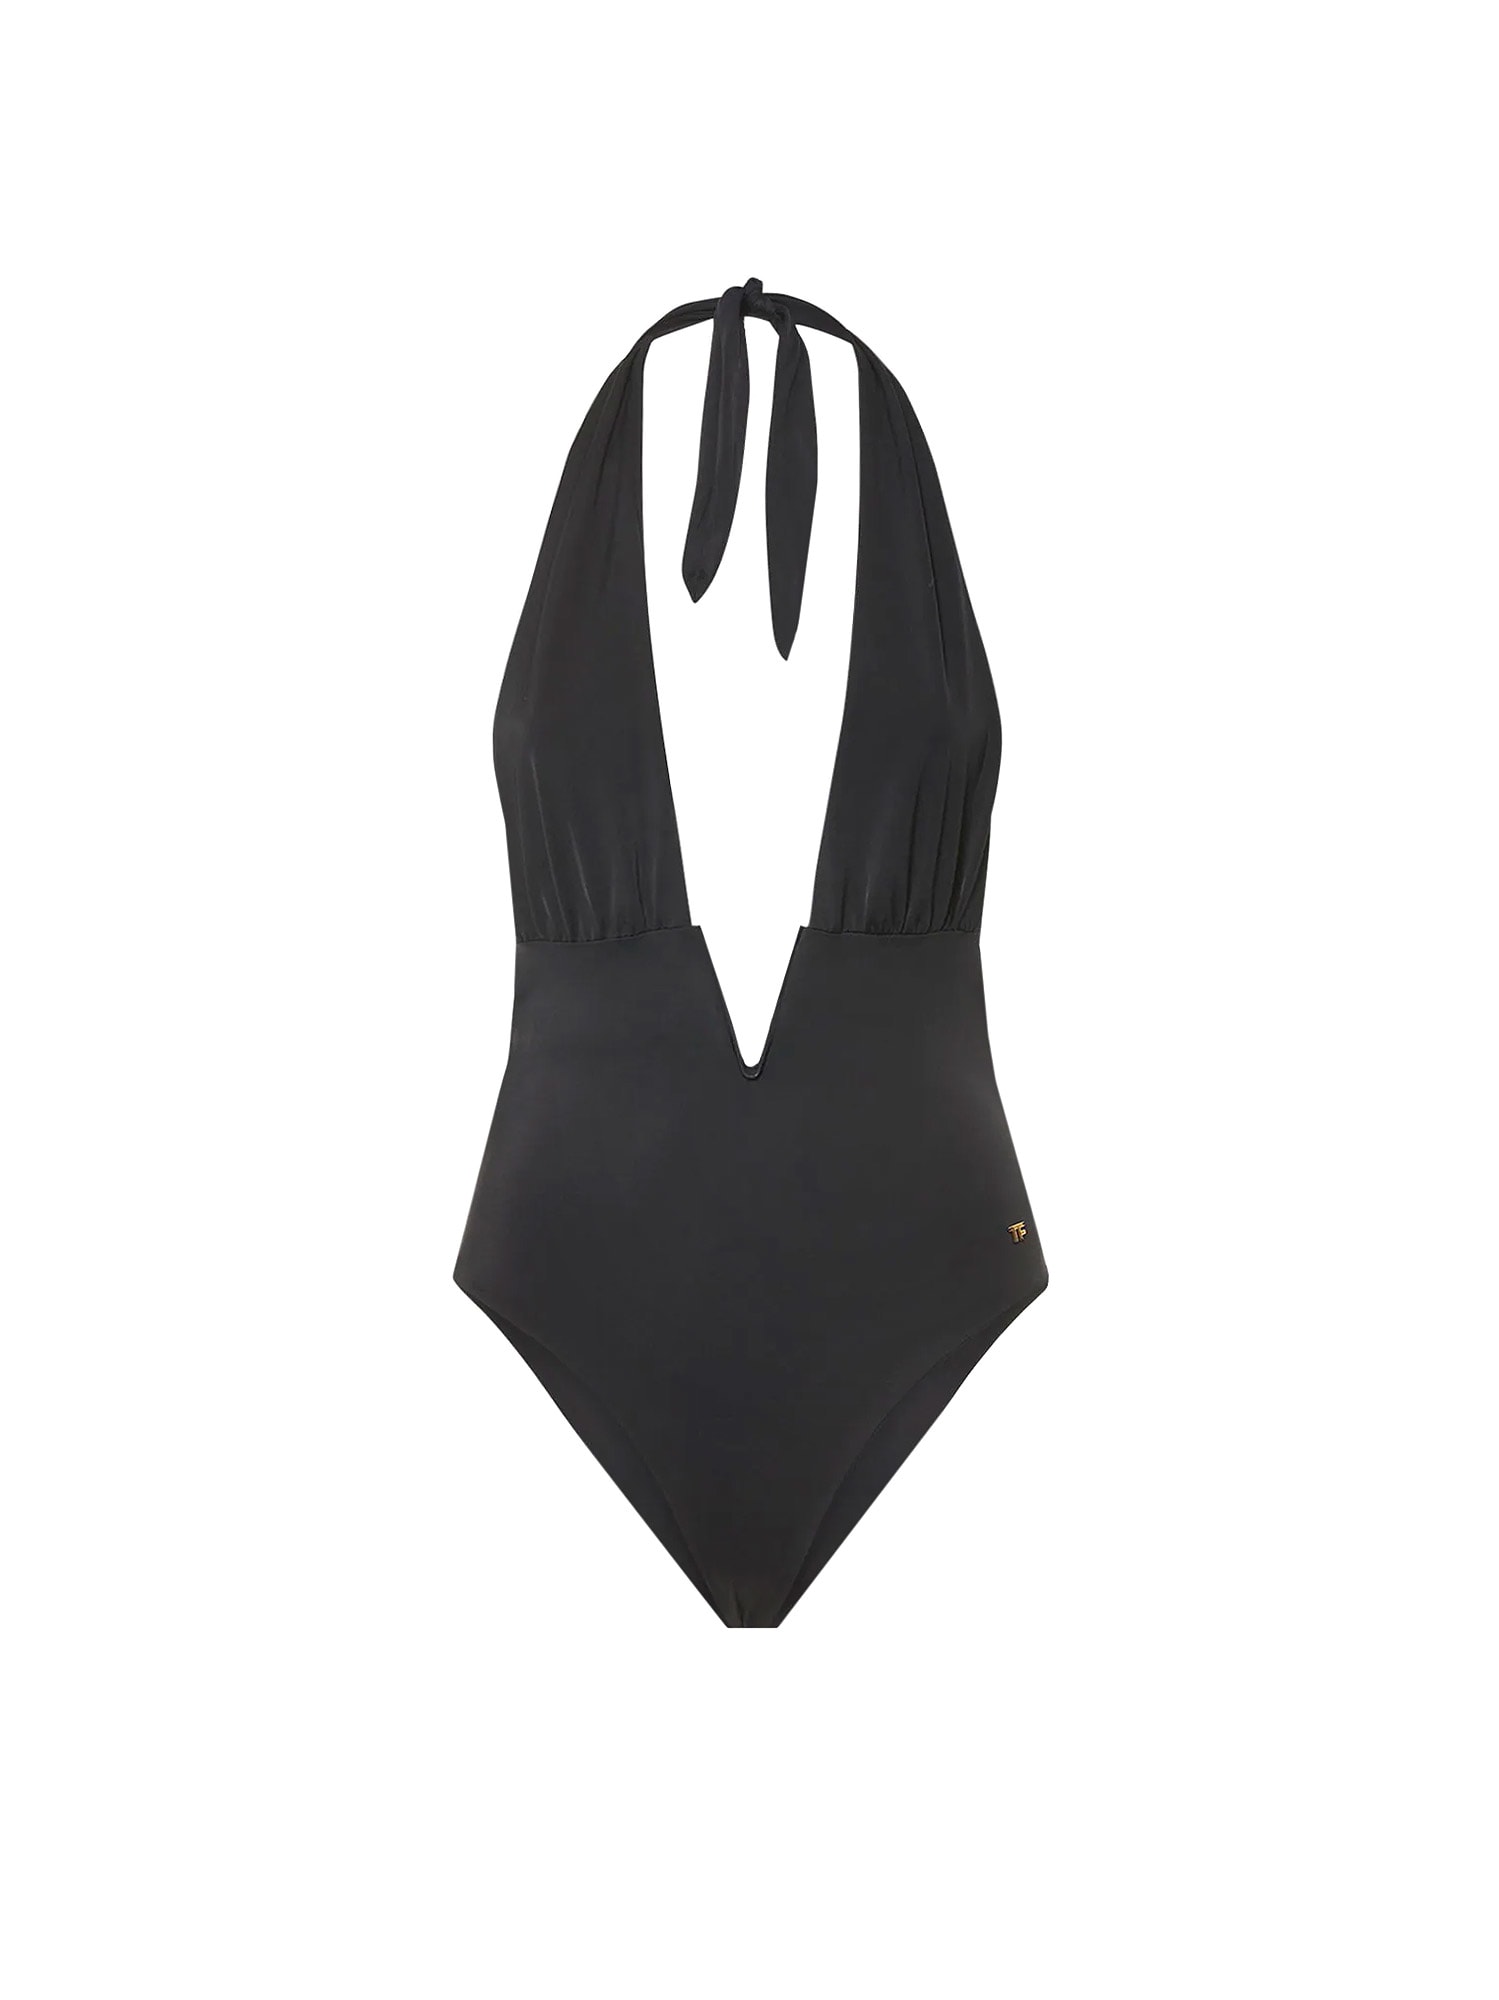 TOM FORD SWIMSUIT